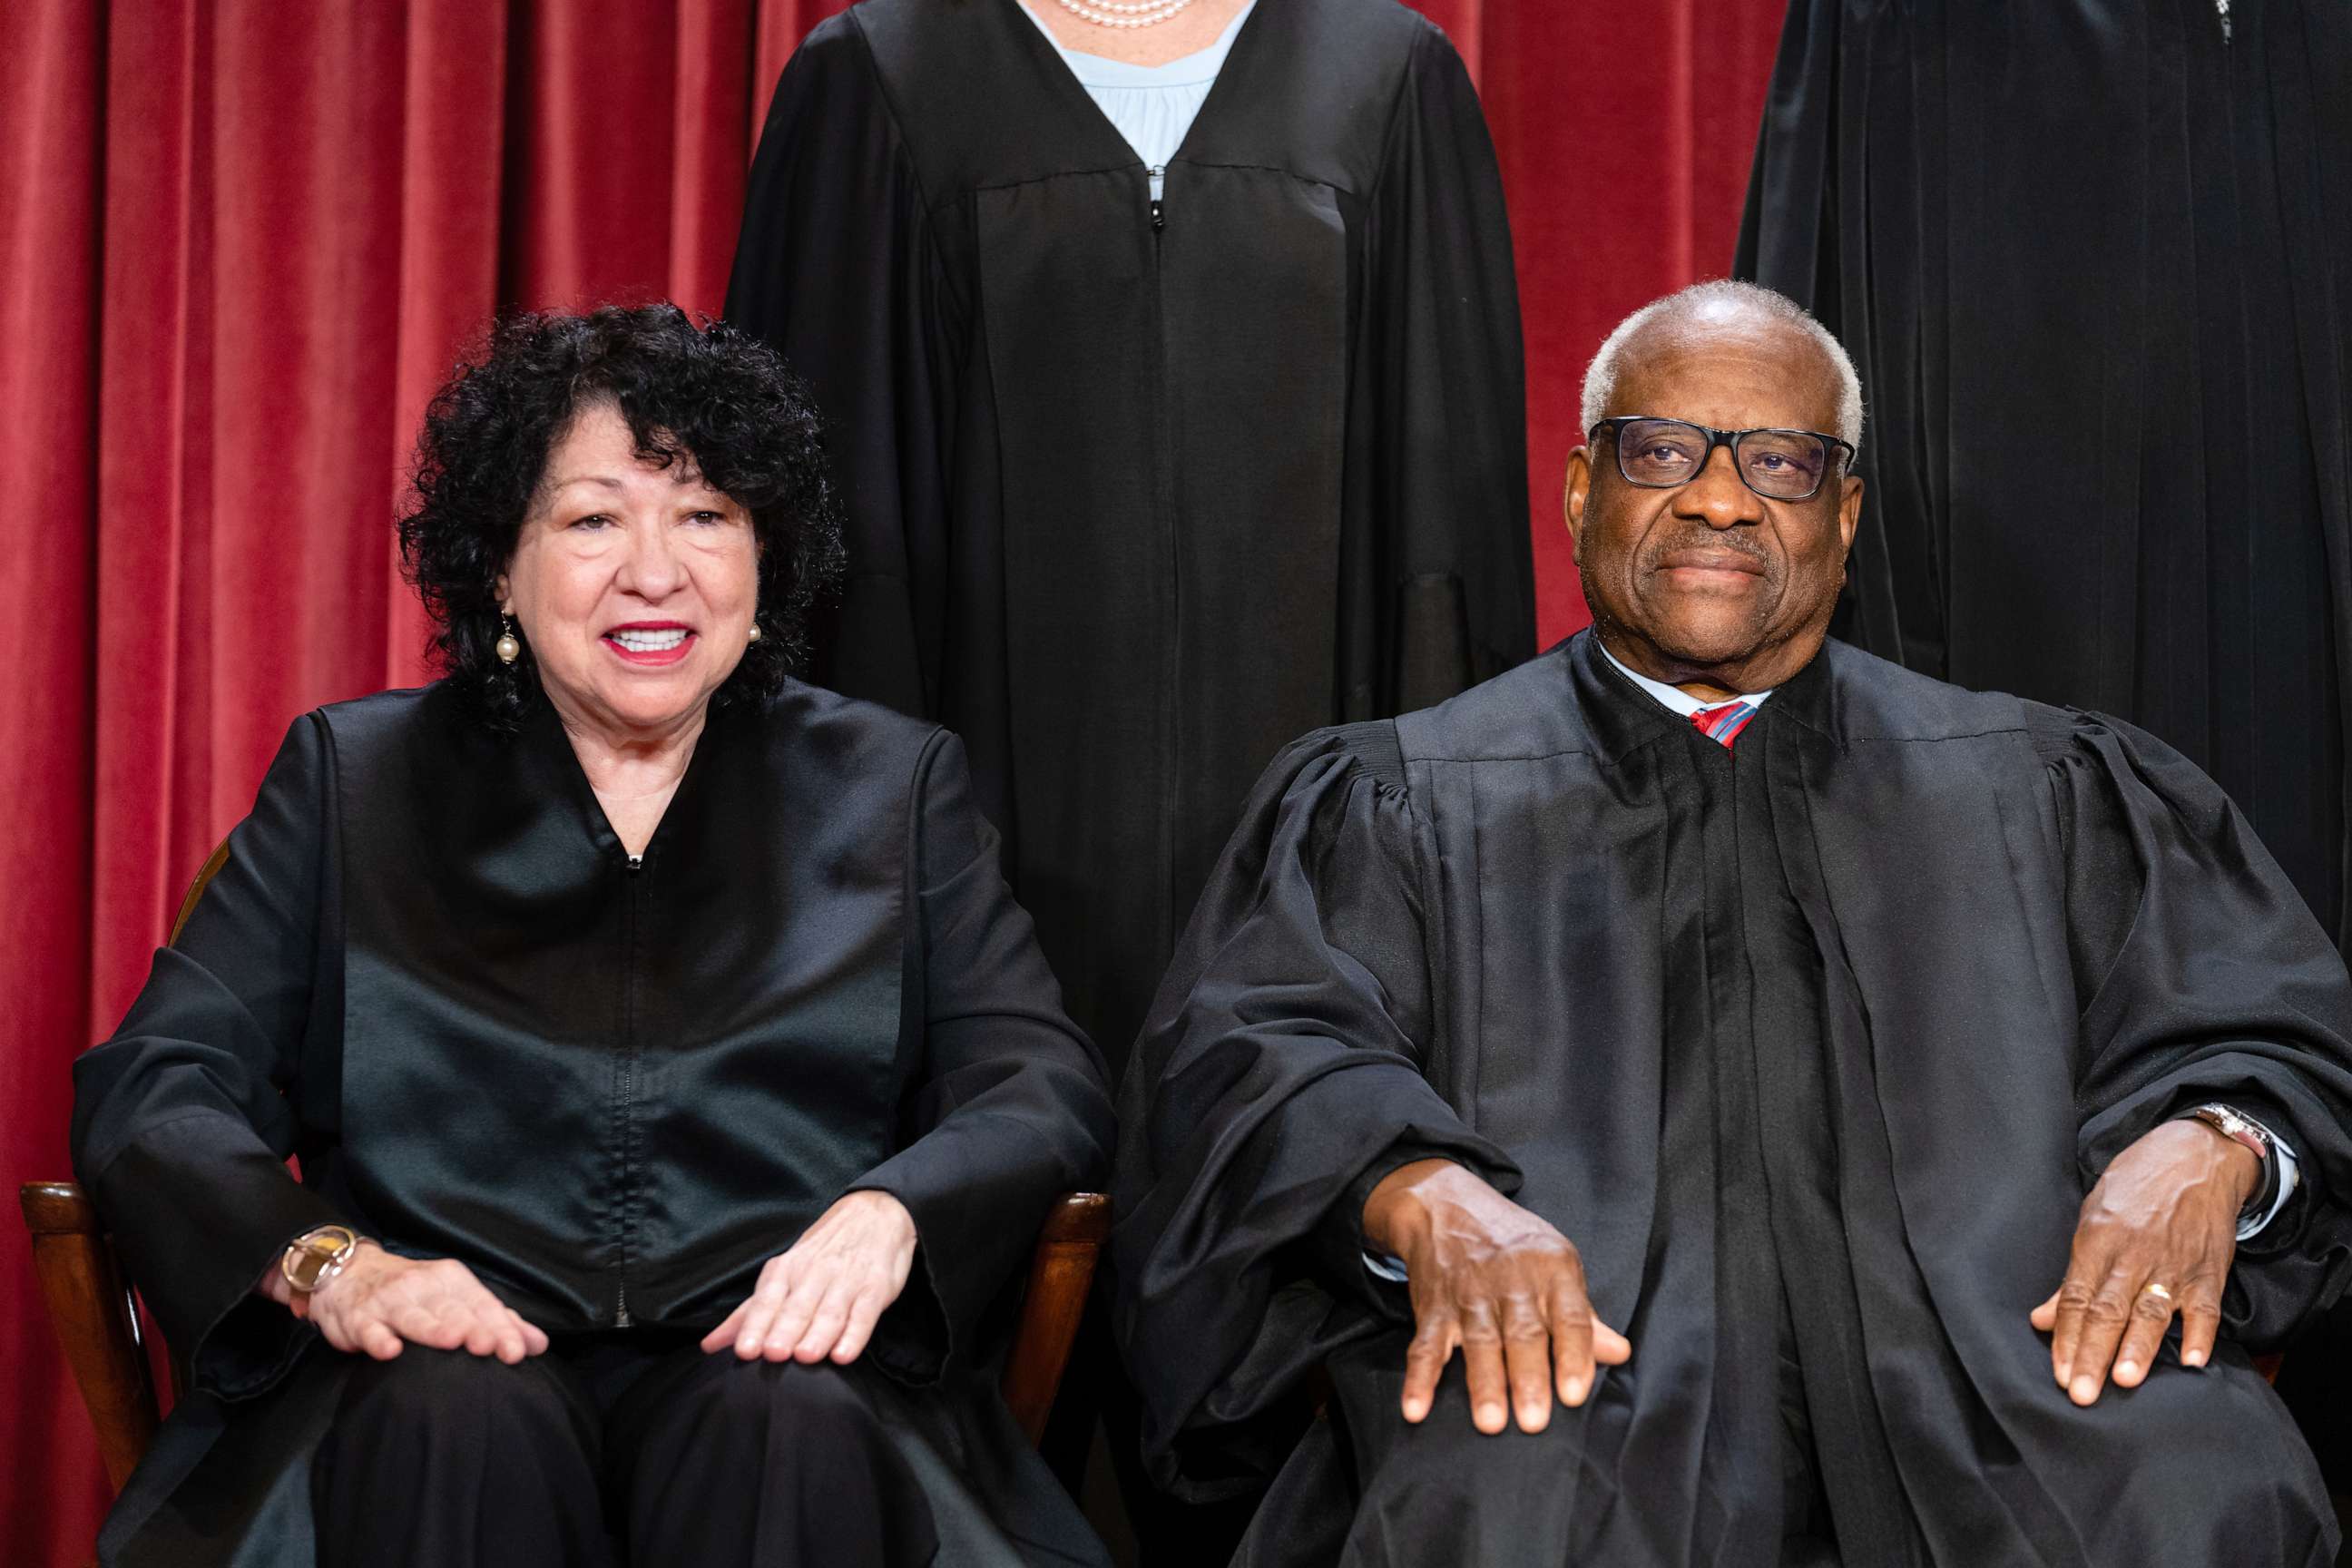 PHOTO: Associate Justice Sonia Sotomayor, left, and Associate Justice Clarence Thomas during the formal group photograph at the Supreme Court in Washington, DC, Oct. 7, 2022.